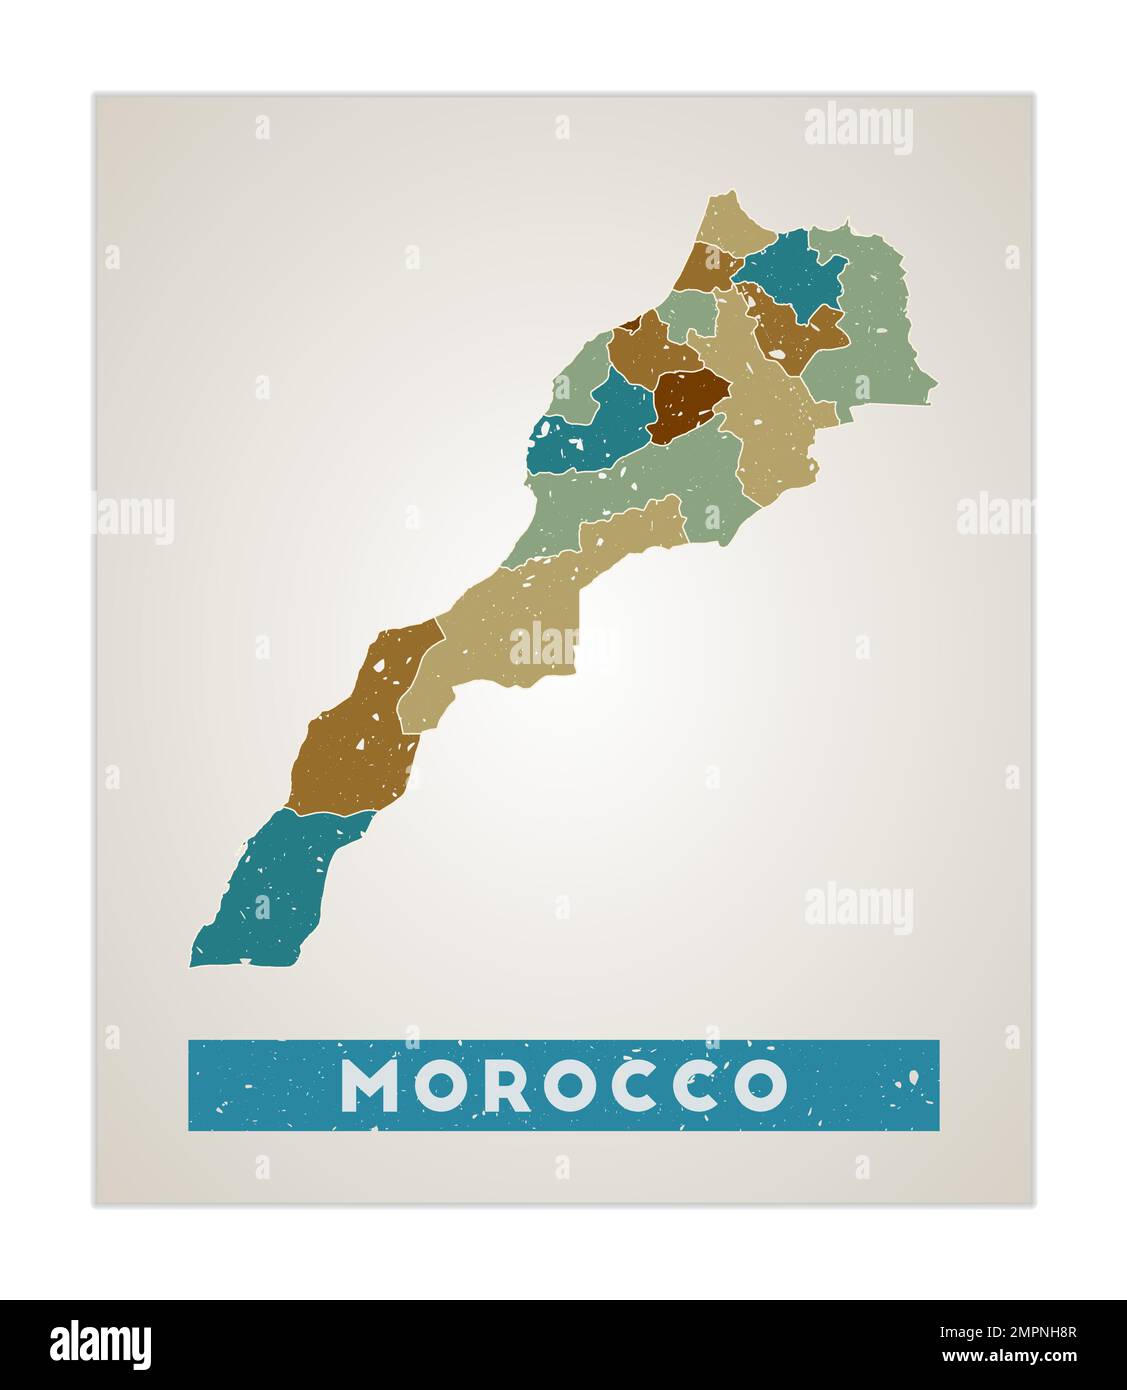 Morocco Map Country Poster With Regions Old Grunge Texture Shape Of Morocco With Country Name 8471